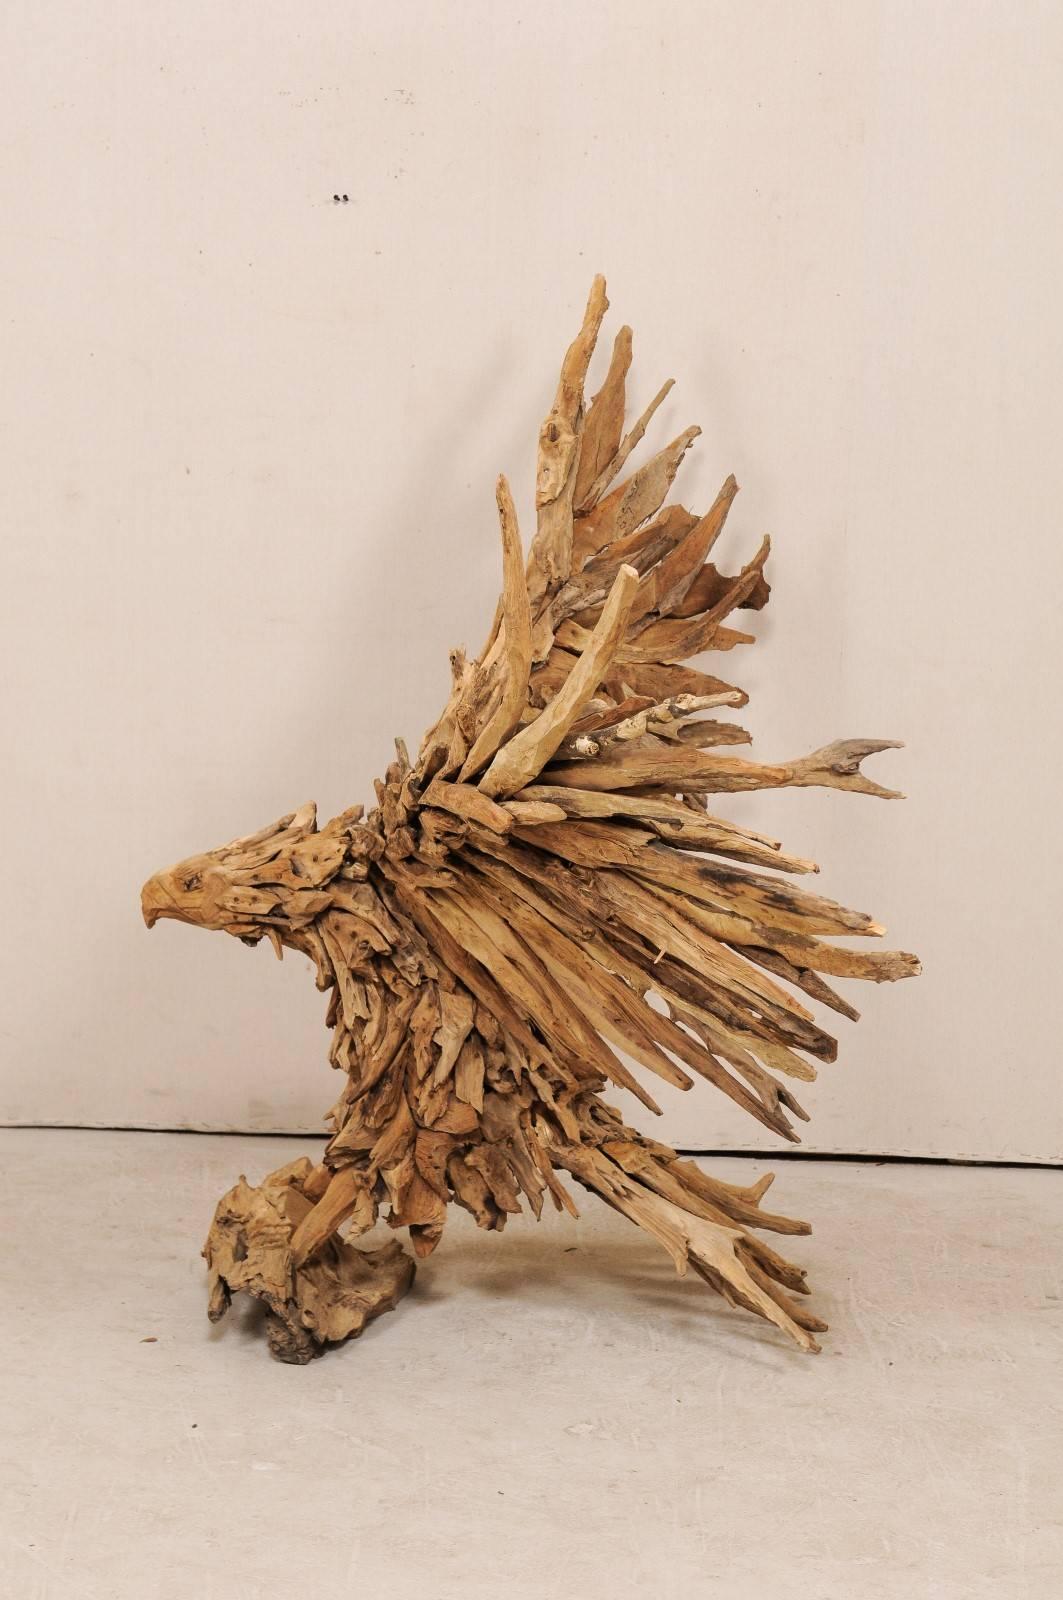  Eagle Sculpture Artisan-Crafted from Driftwood, 4.5 Ft Tall w/ 6+ Ft Wing-Span For Sale 1